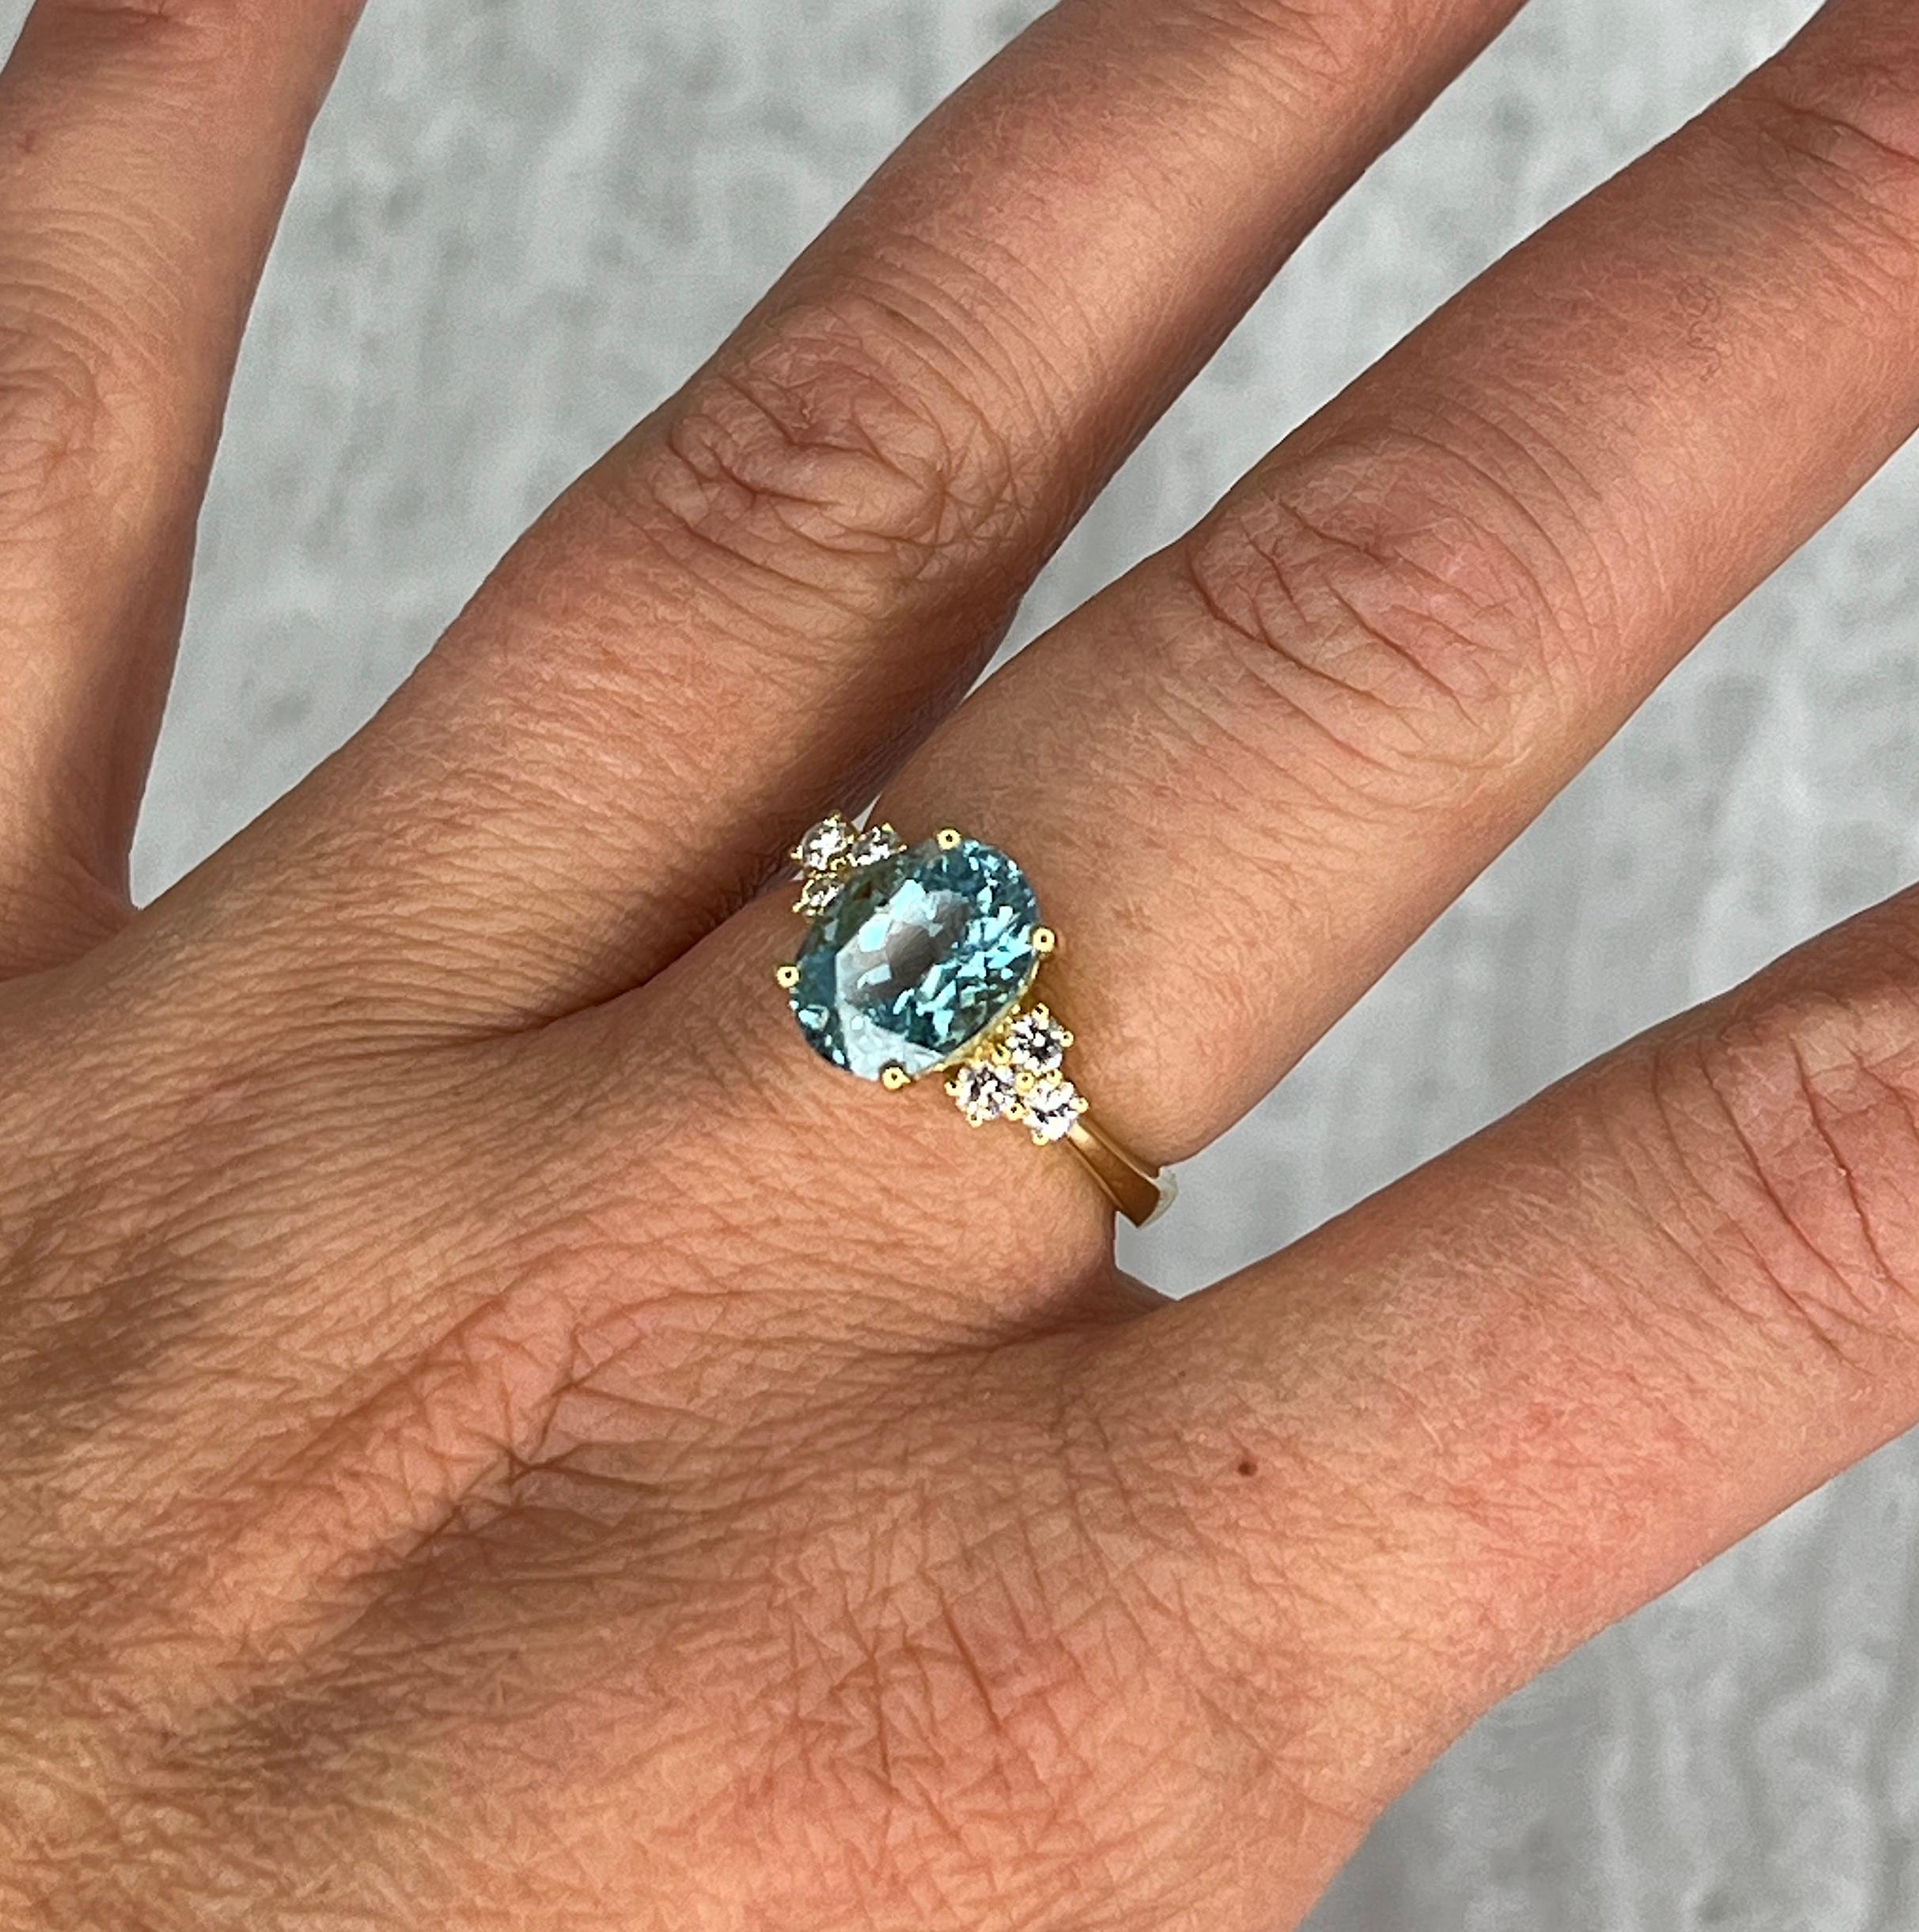 This S.Georgios designer Yellow Gold 18 Karat Ring features a gorgeous Oval shape Aquamarine with a weight of 3.01 Carats and six (6) Brilliant-cut White Diamonds with a total weight of 0.32 Carat on the sides. This stunning classic and super